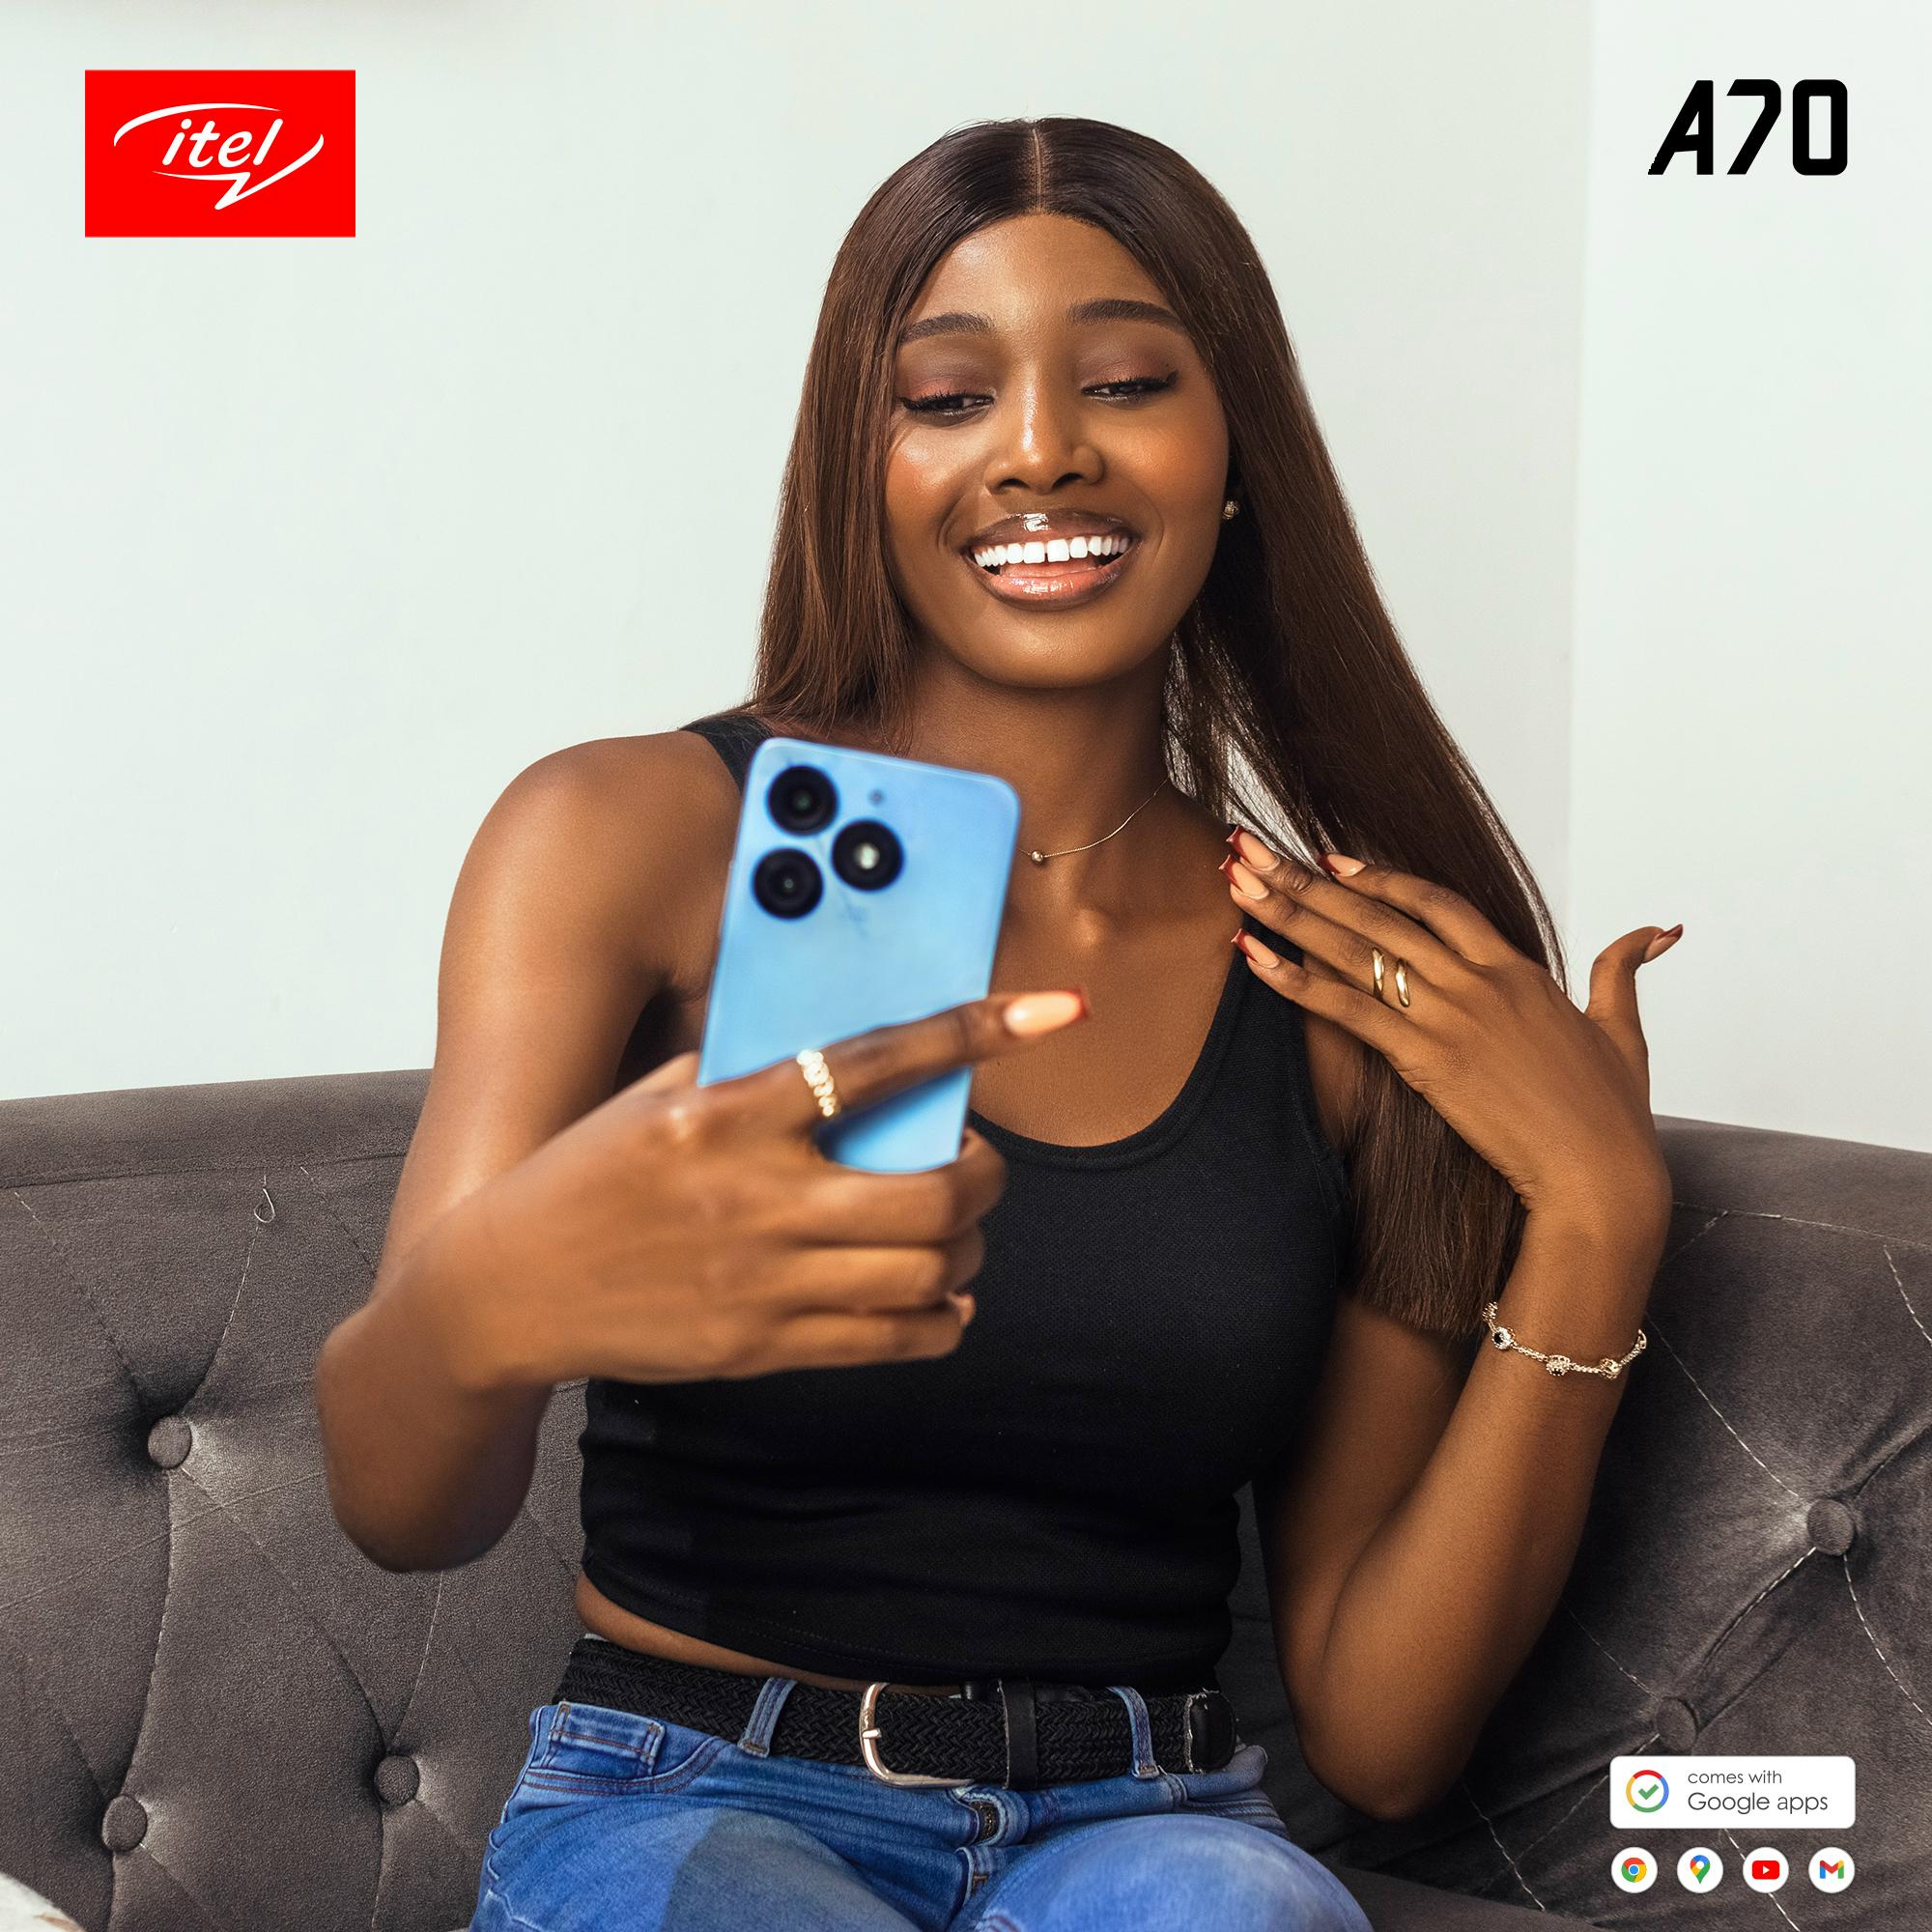 The itel A70 Is Affordable, Reliable, and Stylish. Here’s Why